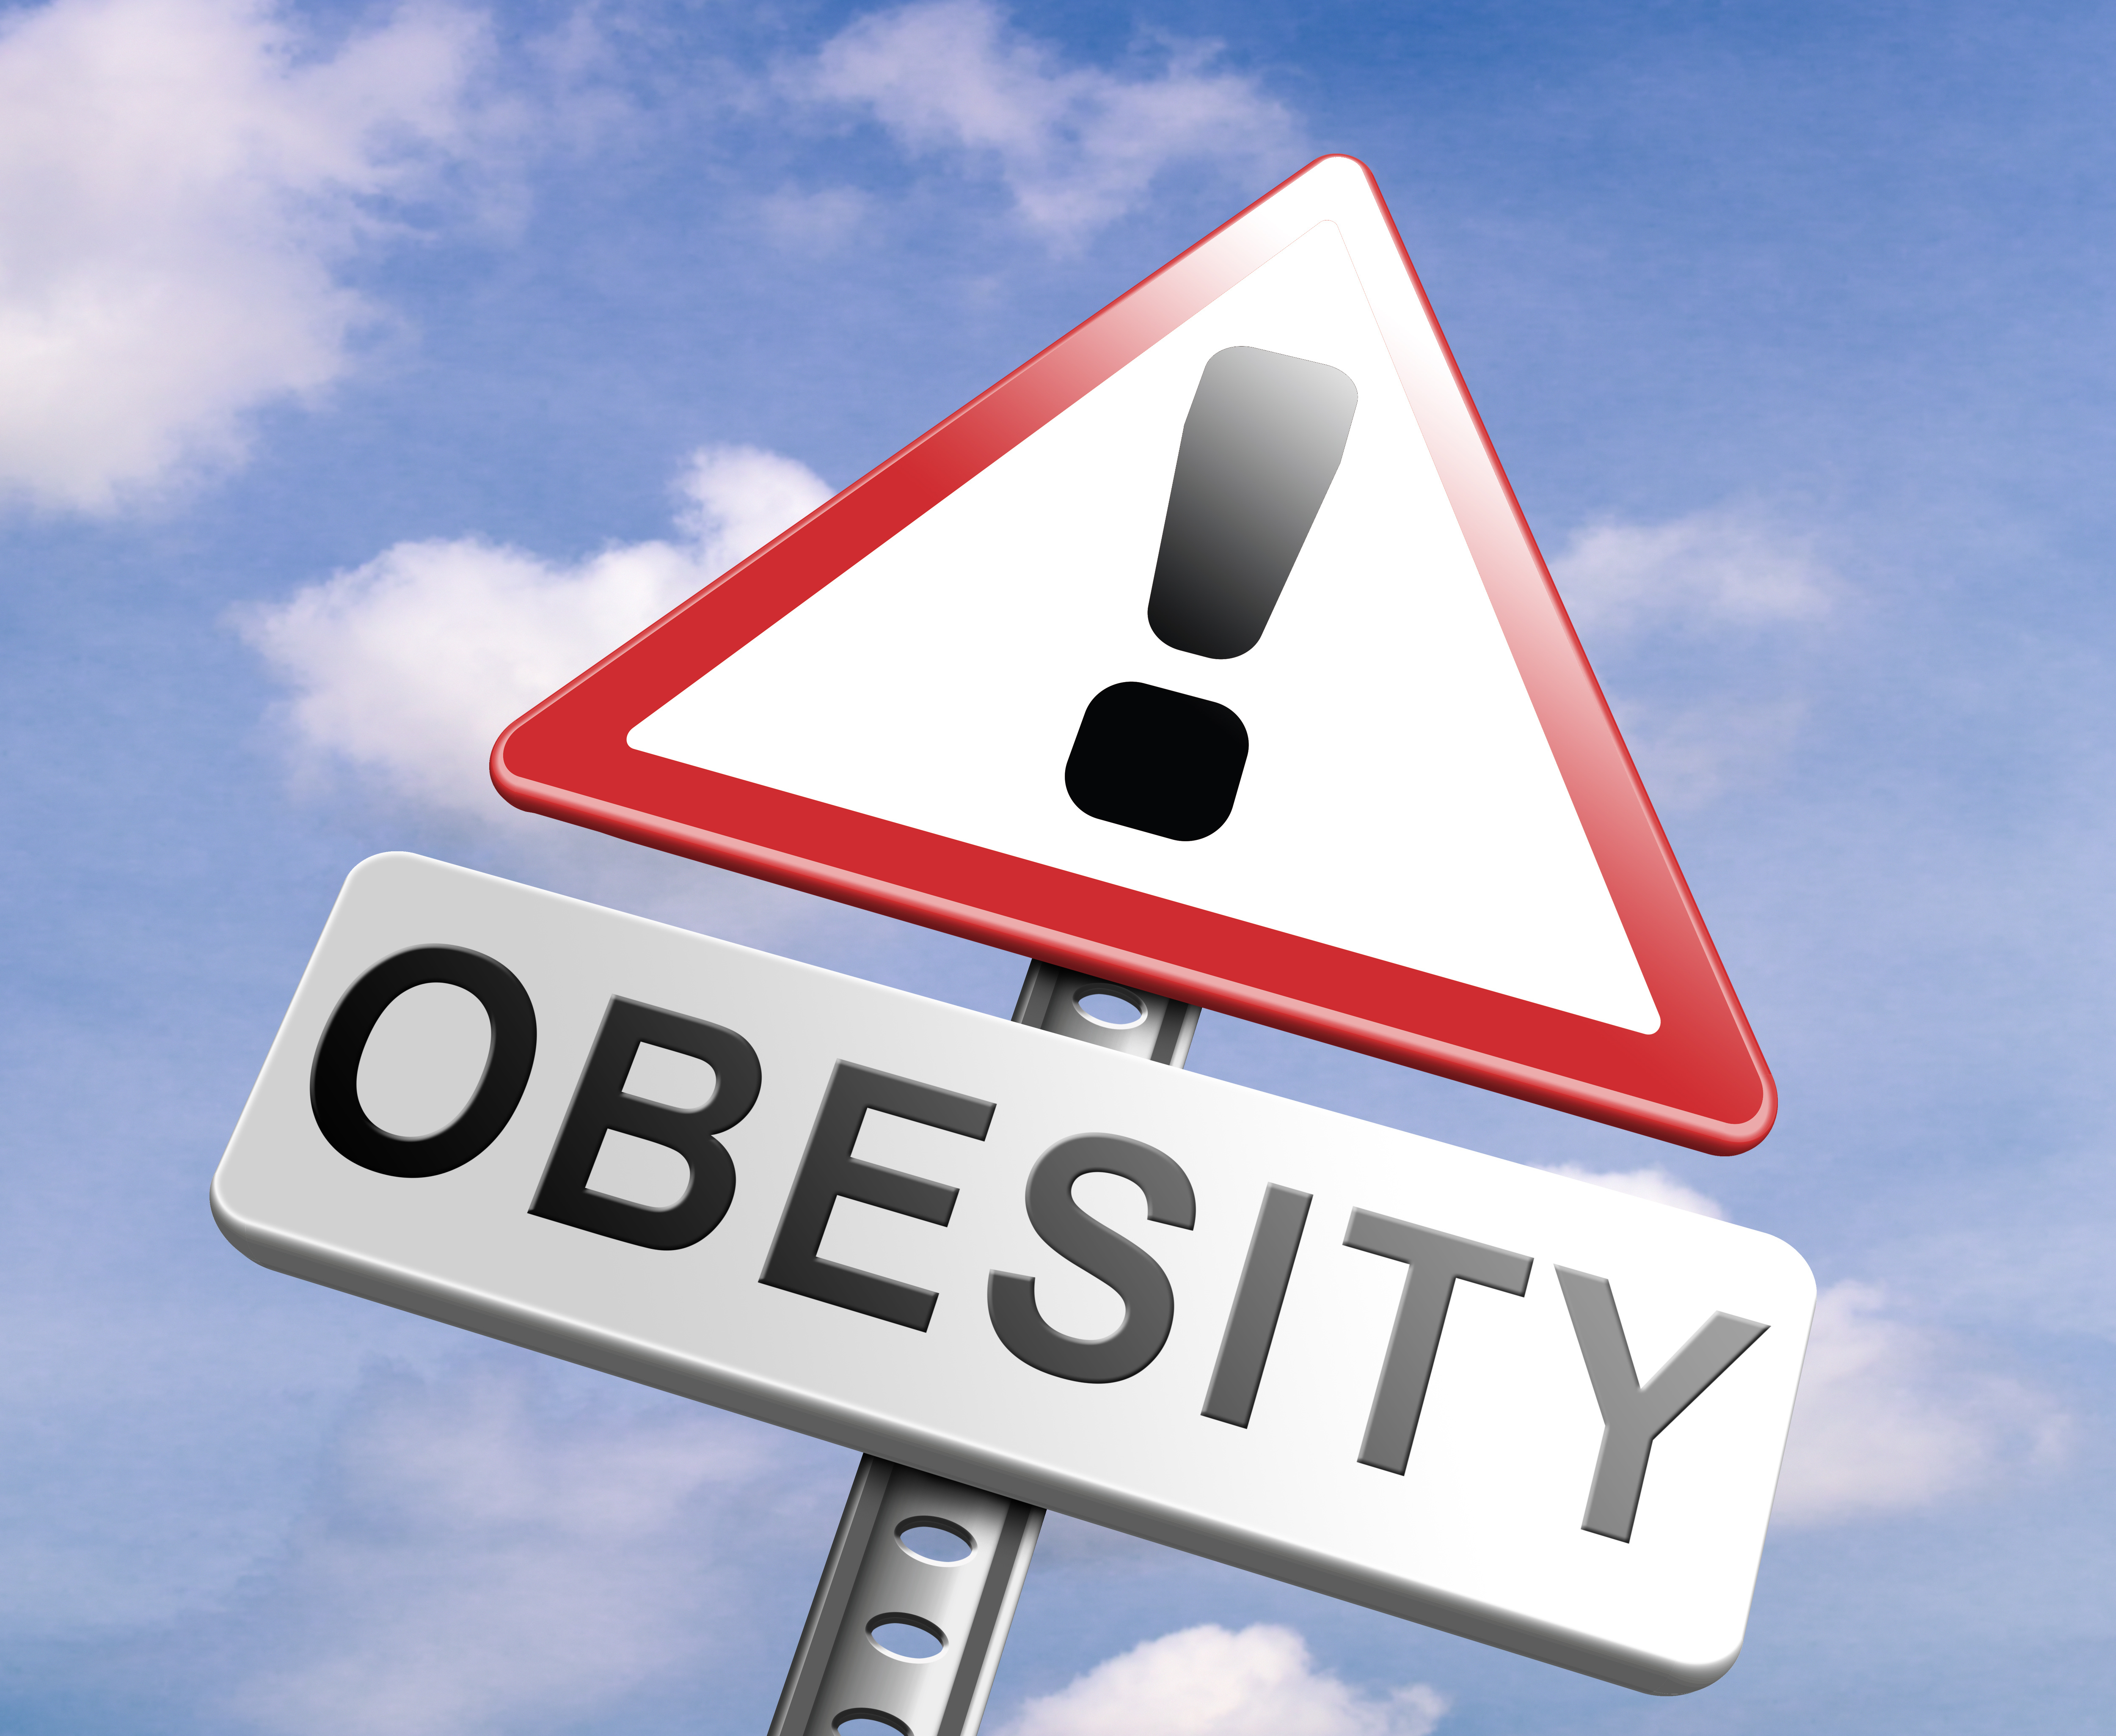 obesity prevention stop over weight start campaign with low fat diet for obese children and adults with eating disorder